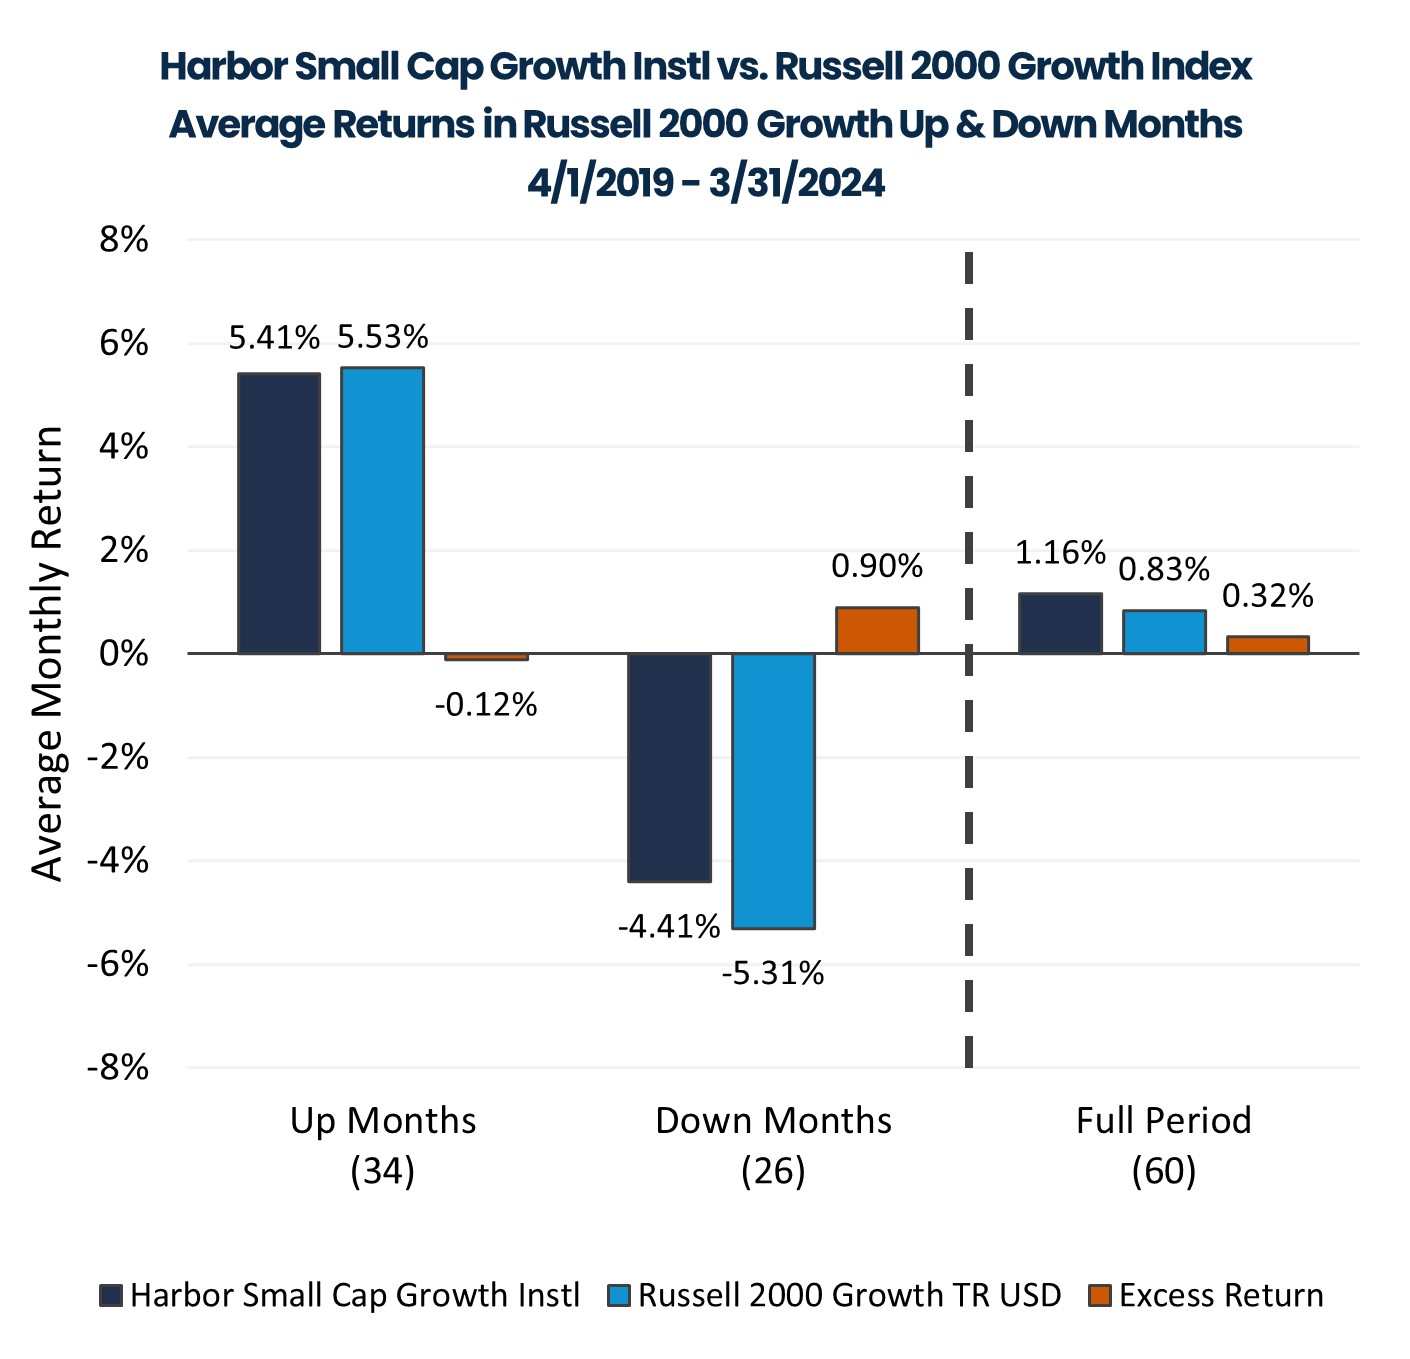 Harbor Small Cap Gowth Instl vs. Russell 2000 Growth Index Average Returns in Russell 2000 Growth Up & Down Months 4/1/2019 - 3/31/2024